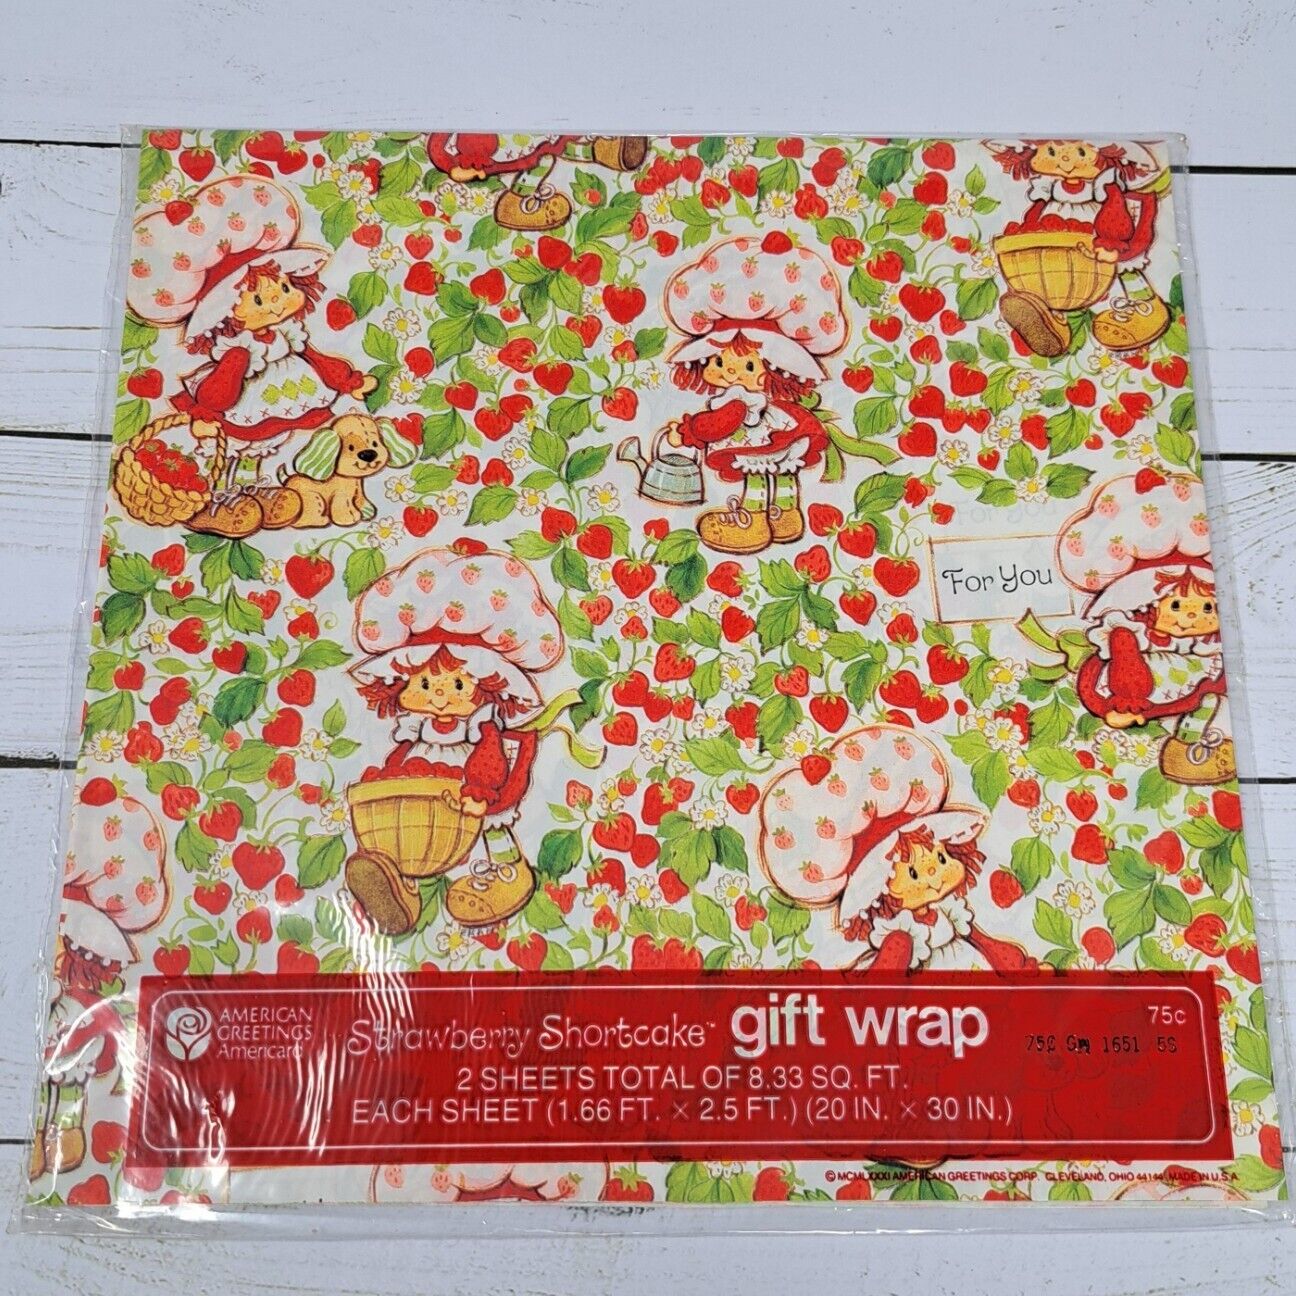 VTG 1981 Strawberry Shortcake American Greetings Gift Wrap Wrapping Paper